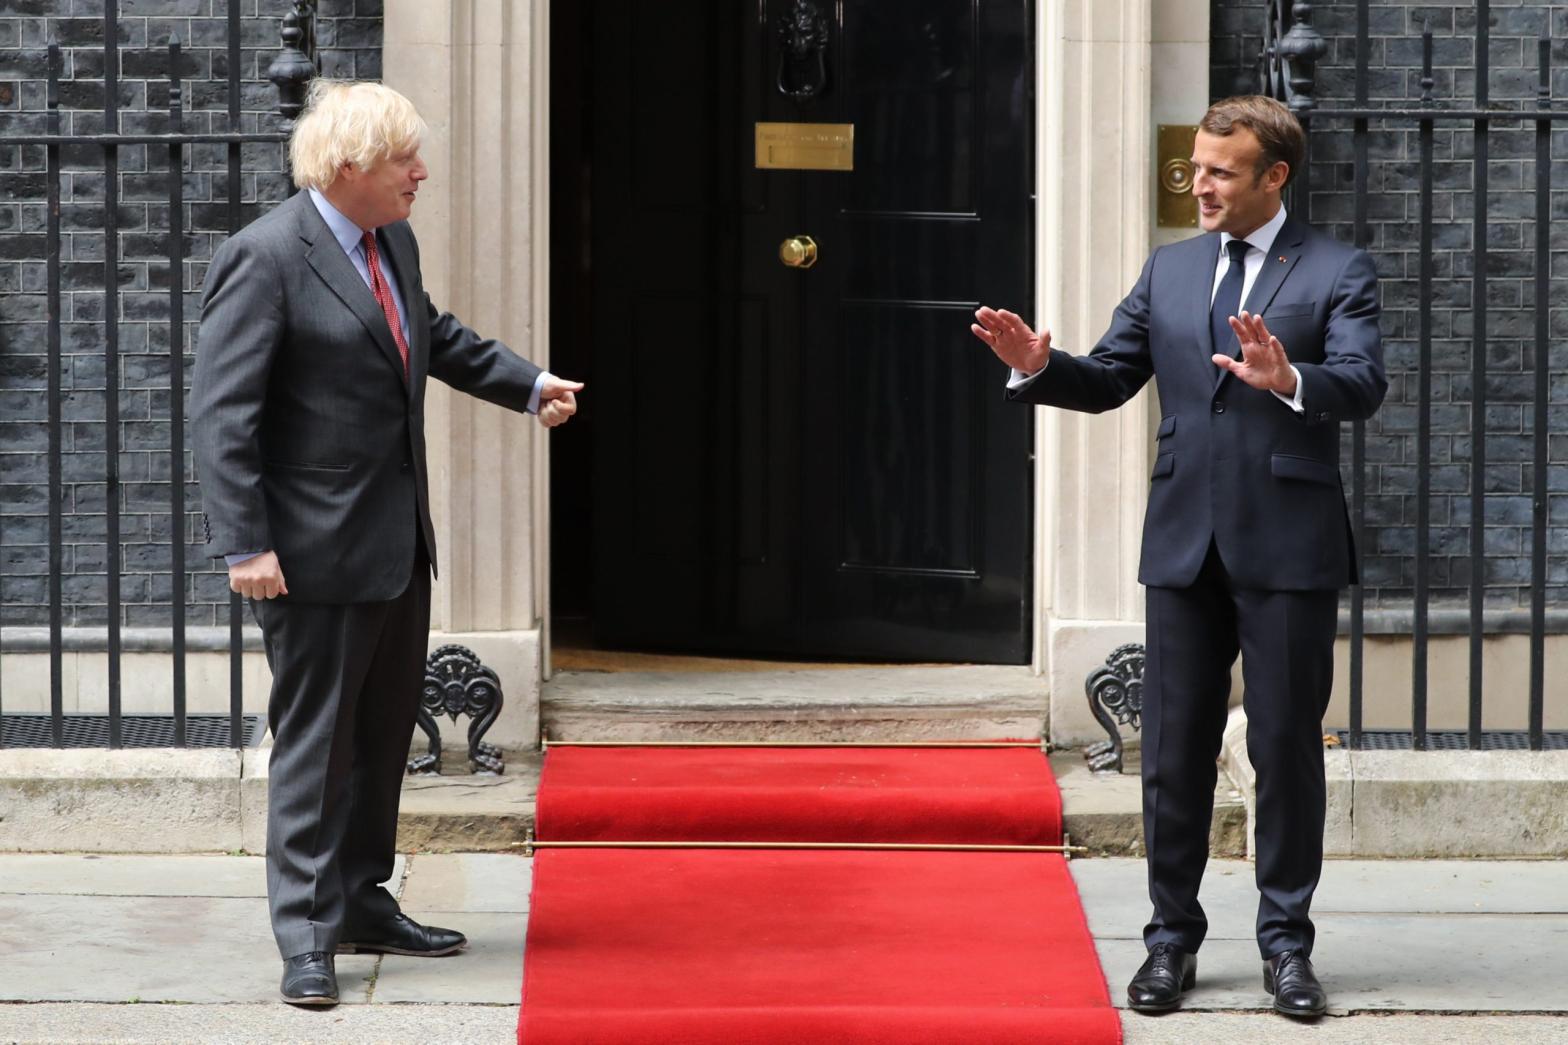 Prime Minister, Boris Johnson greets French President, Emmanuel Macron while keeping a social distance at Number 10 Downing Street on June 18, 2020. (Photo: Dan Kitwood, Getty Images)